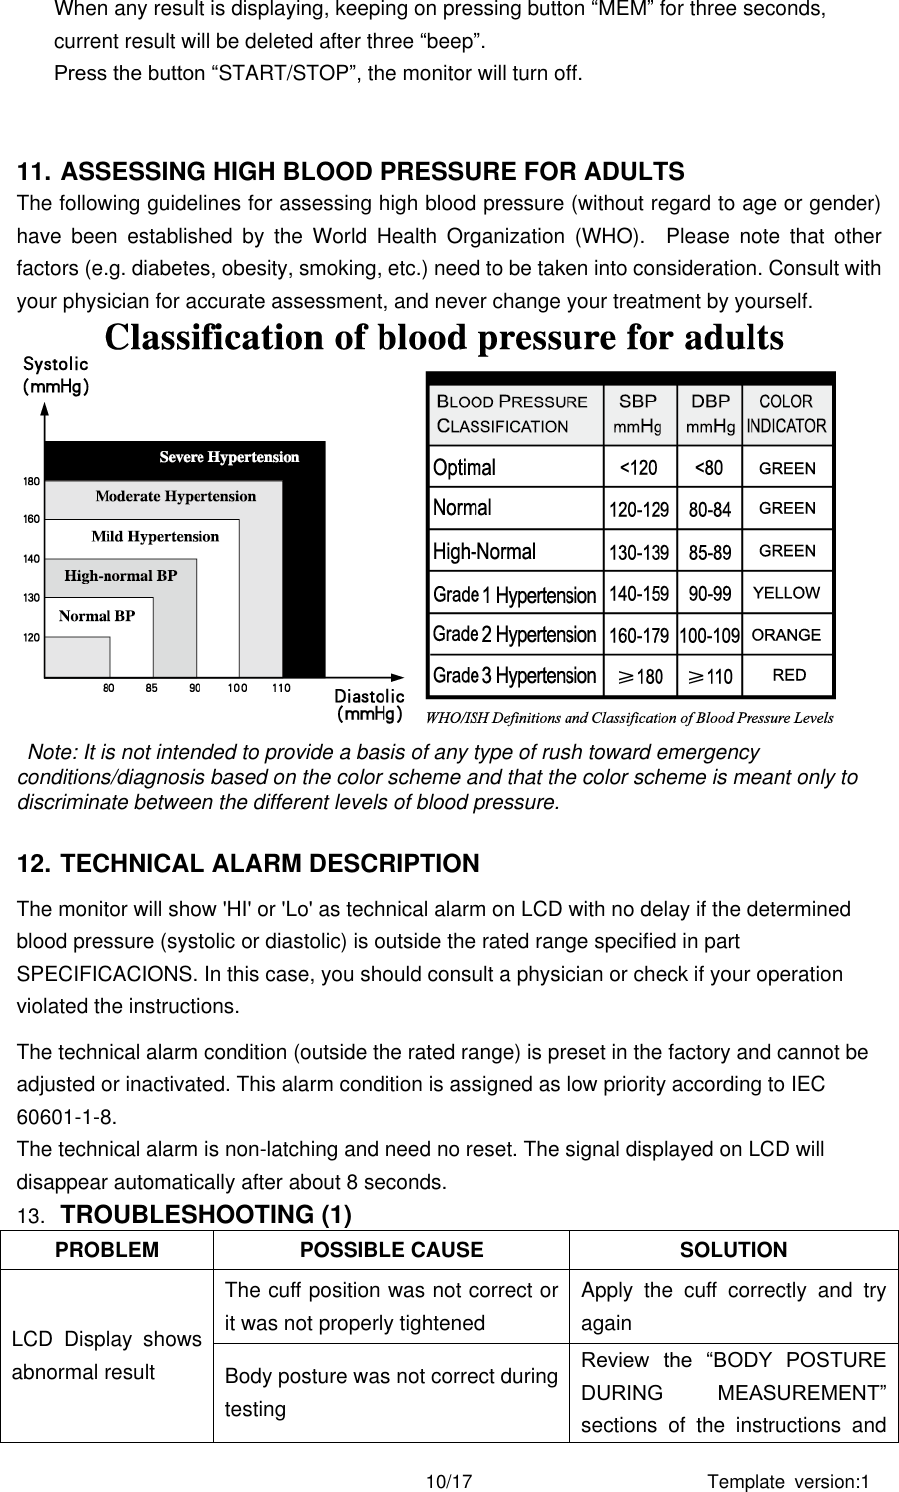 Template  version:1 10/17 When any result is displaying, keeping on pressing button “MEM” for three seconds, current result will be deleted after three “beep”. Press the button “START/STOP”, the monitor will turn off.   11. ASSESSING HIGH BLOOD PRESSURE FOR ADULTS The following guidelines for assessing high blood pressure (without regard to age or gender) have  been  established  by  the  World  Health  Organization  (WHO).    Please  note  that  other factors (e.g. diabetes, obesity, smoking, etc.) need to be taken into consideration. Consult with your physician for accurate assessment, and never change your treatment by yourself.  Note: It is not intended to provide a basis of any type of rush toward emergency conditions/diagnosis based on the color scheme and that the color scheme is meant only to discriminate between the different levels of blood pressure.    12. TECHNICAL ALARM DESCRIPTION The monitor will show &apos;HI&apos; or &apos;Lo&apos; as technical alarm on LCD with no delay if the determined blood pressure (systolic or diastolic) is outside the rated range specified in part SPECIFICACIONS. In this case, you should consult a physician or check if your operation violated the instructions. The technical alarm condition (outside the rated range) is preset in the factory and cannot be adjusted or inactivated. This alarm condition is assigned as low priority according to IEC 60601-1-8. The technical alarm is non-latching and need no reset. The signal displayed on LCD will disappear automatically after about 8 seconds. 13. TROUBLESHOOTING (1) PROBLEM POSSIBLE CAUSE SOLUTION LCD  Display  shows abnormal result The cuff position was not correct or it was not properly tightened Apply  the  cuff  correctly  and  try again Body posture was not correct during testing Review  the  “BODY  POSTURE DURING  MEASUREMENT” sections  of  the  instructions  and 